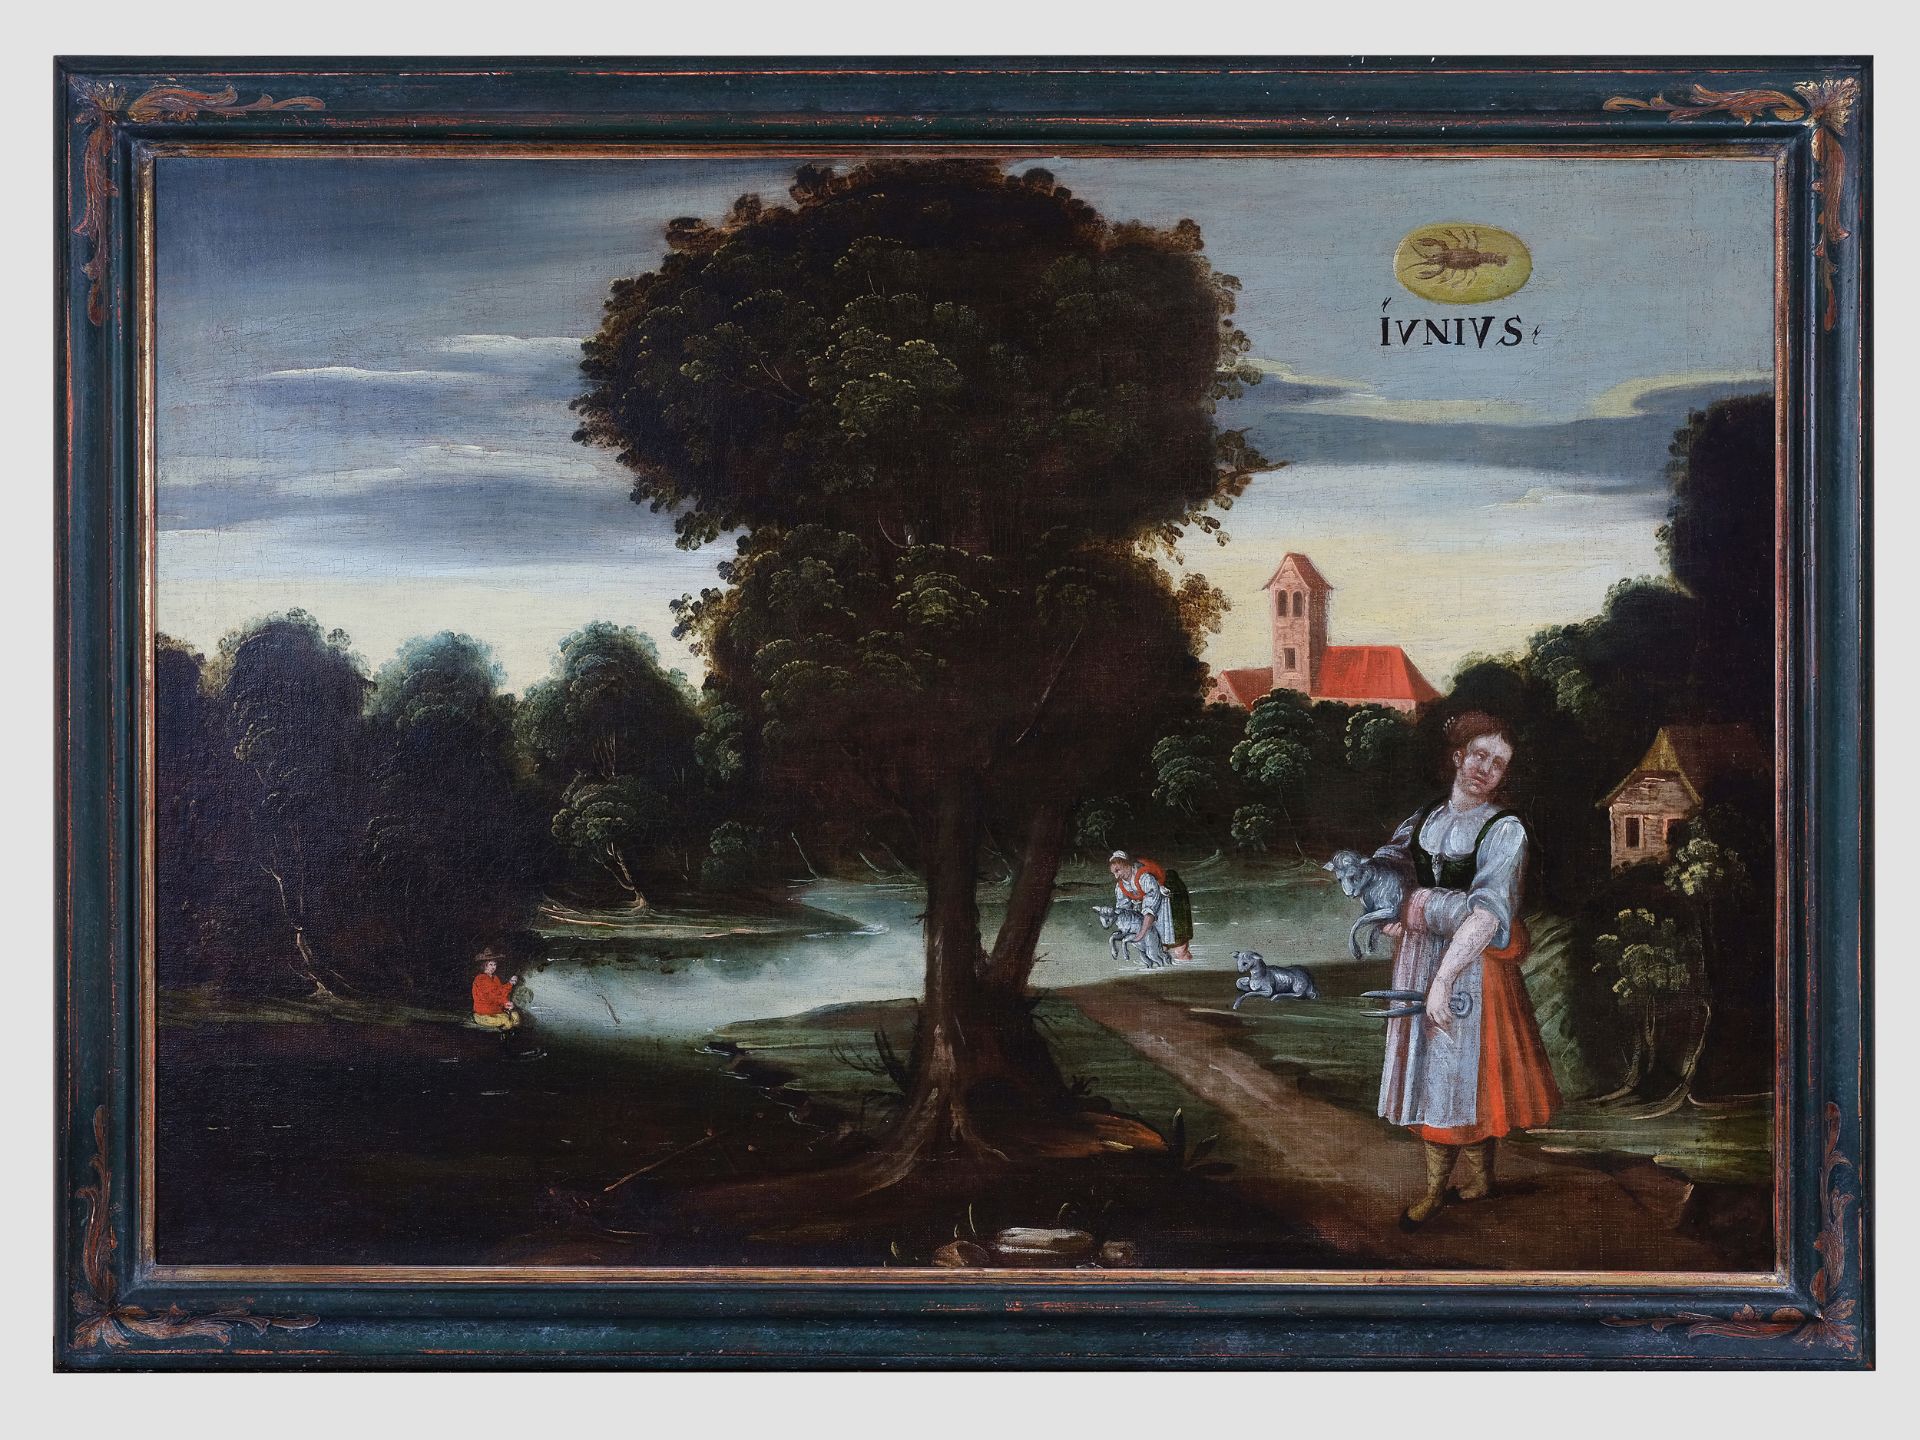 The 12 Months - From a Castle in Lower Austria, South German, 17th century - Image 3 of 13